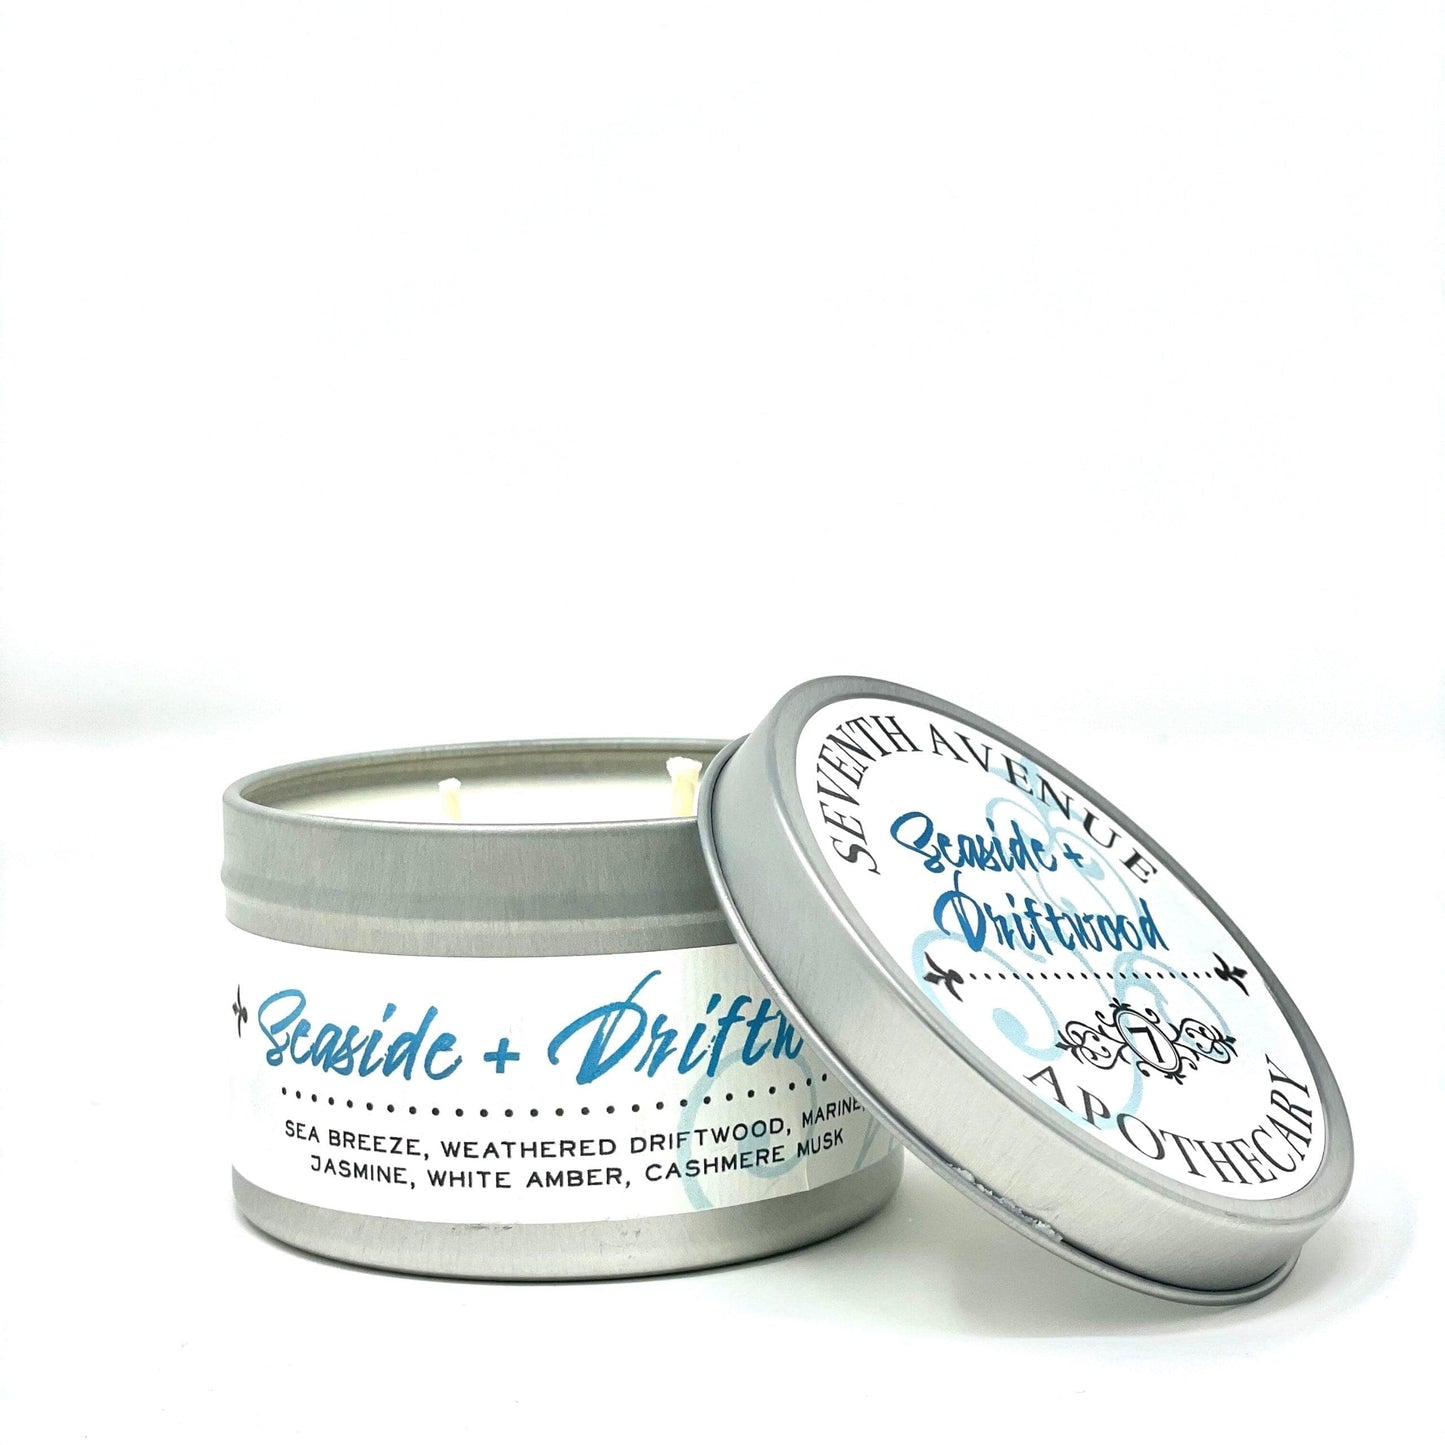 Seaside + Driftwood Soy Wax Candle - Travel Tin